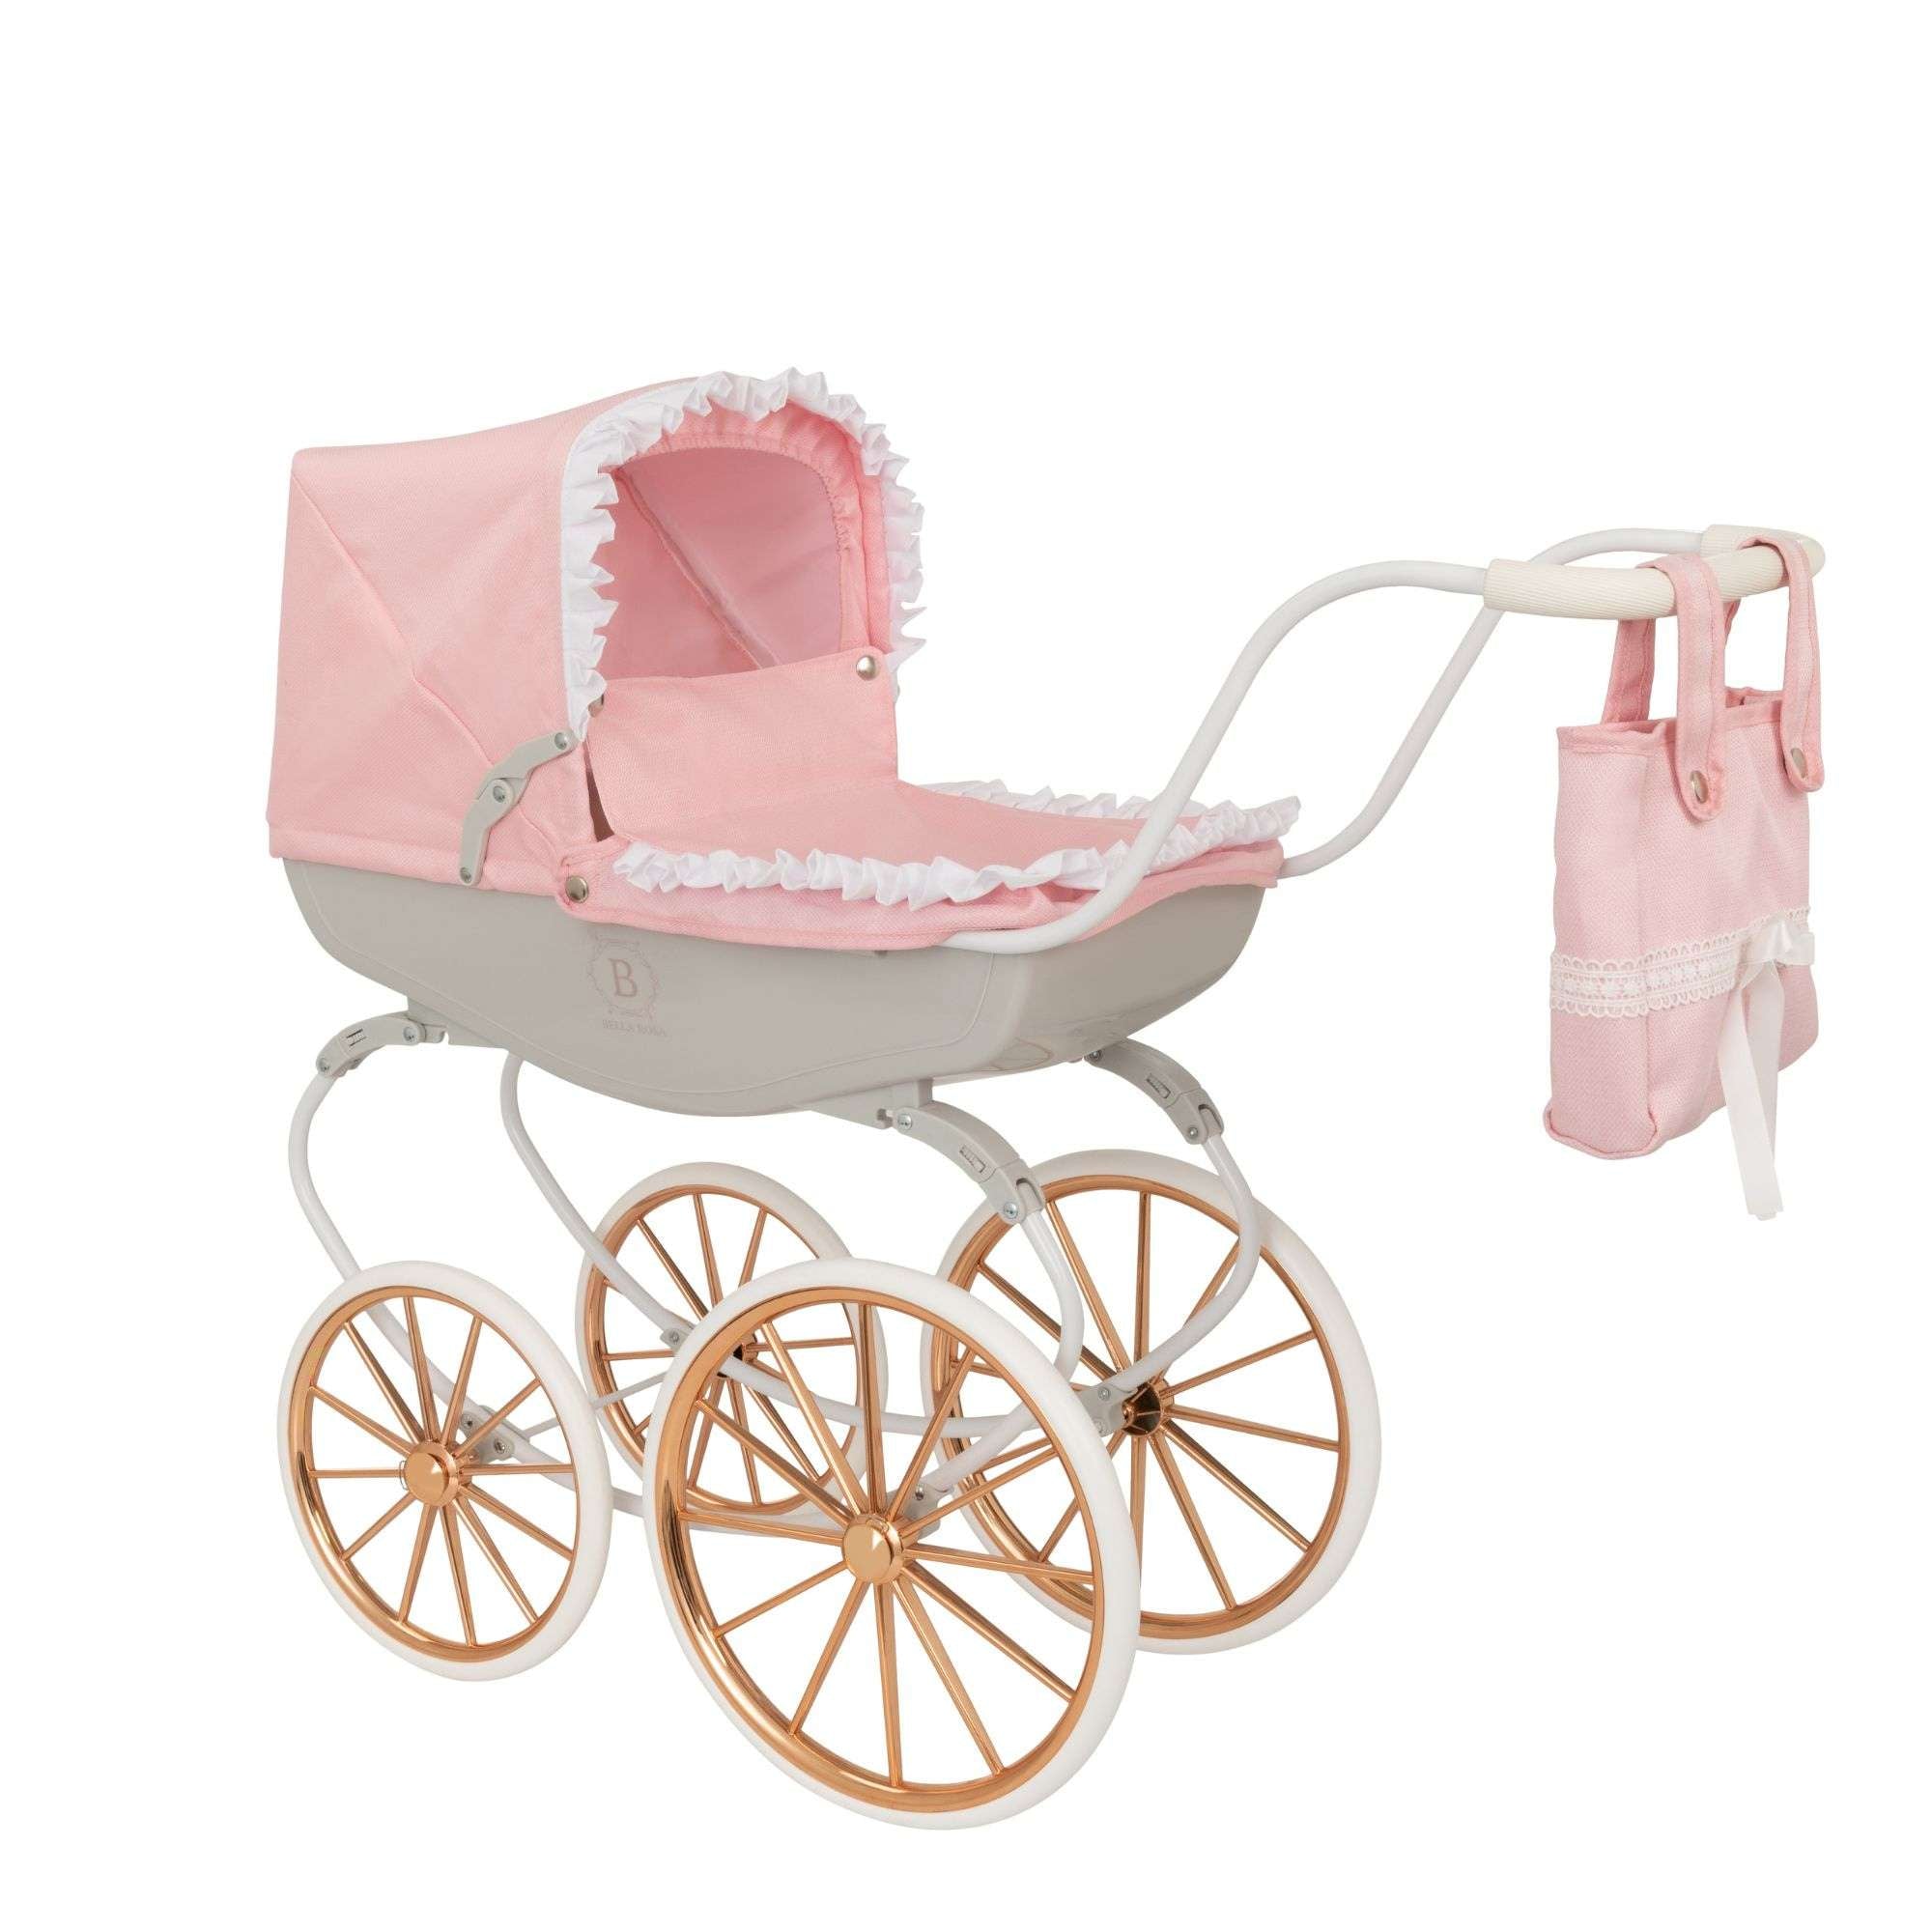 Bella Rosa Cambridge Carriage Dolls Pram - Pink & Rose Gold from Wowow Toys